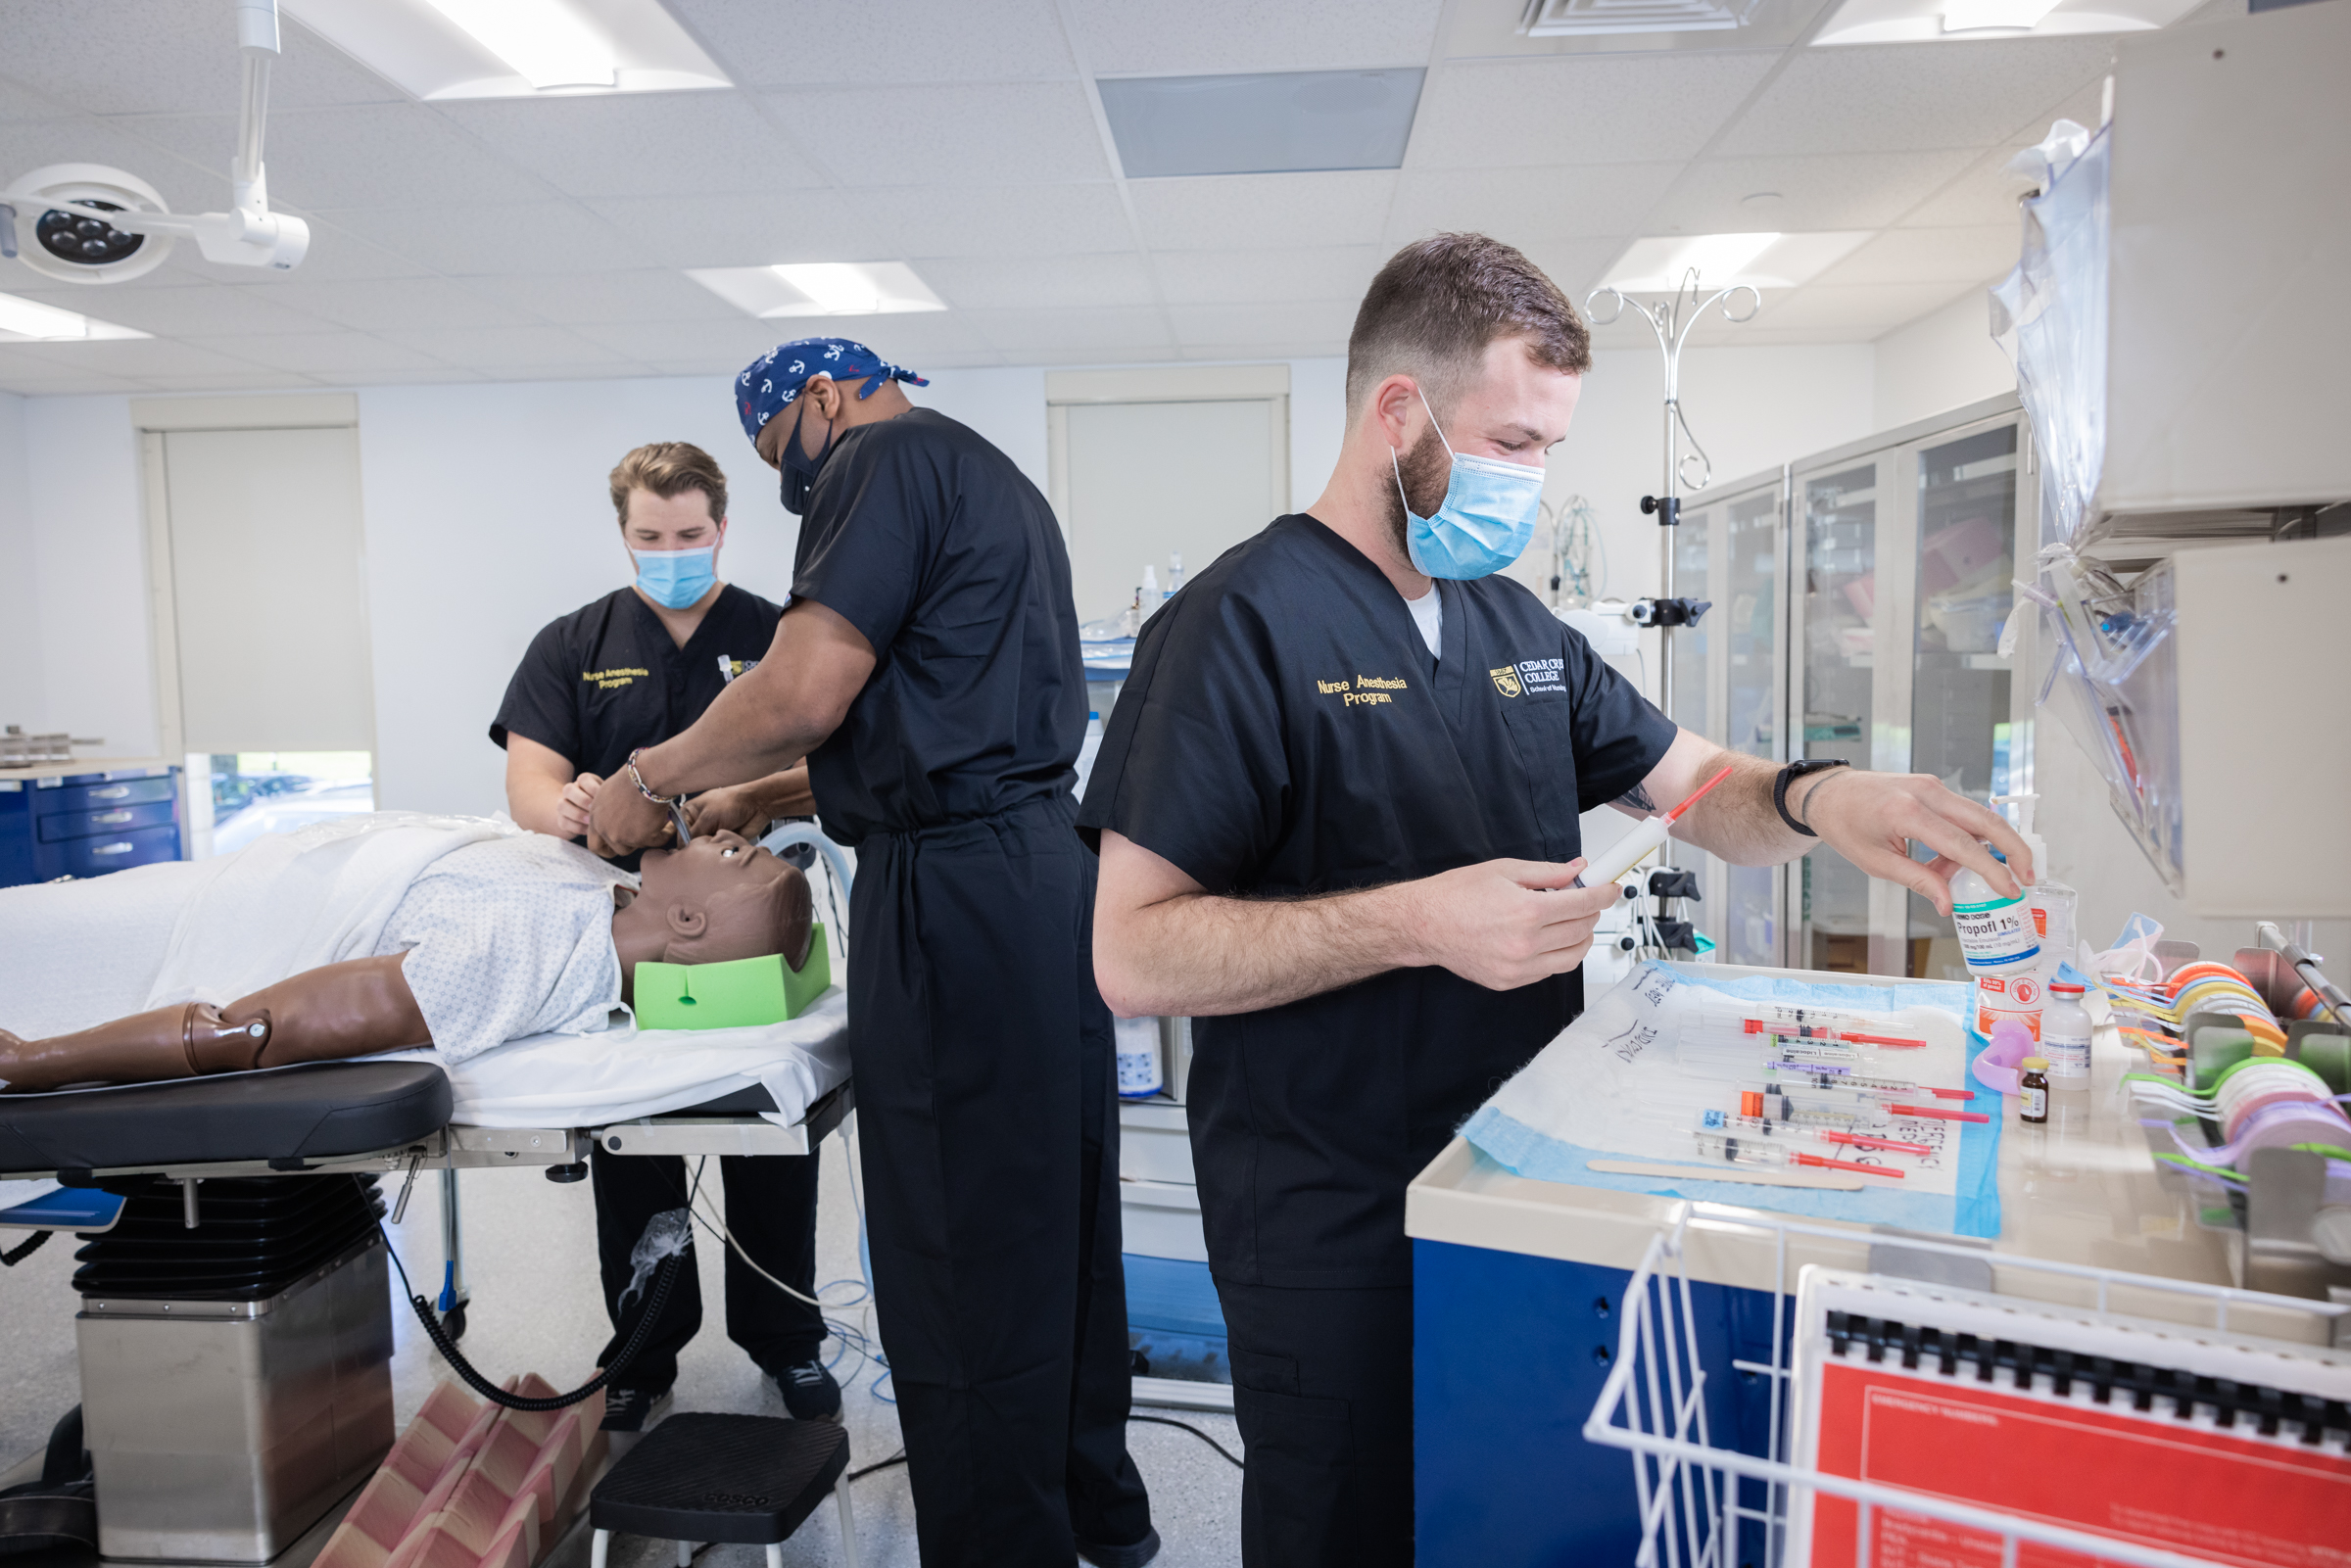 Three NAP students in blue scrubs and face masks working in a training lab